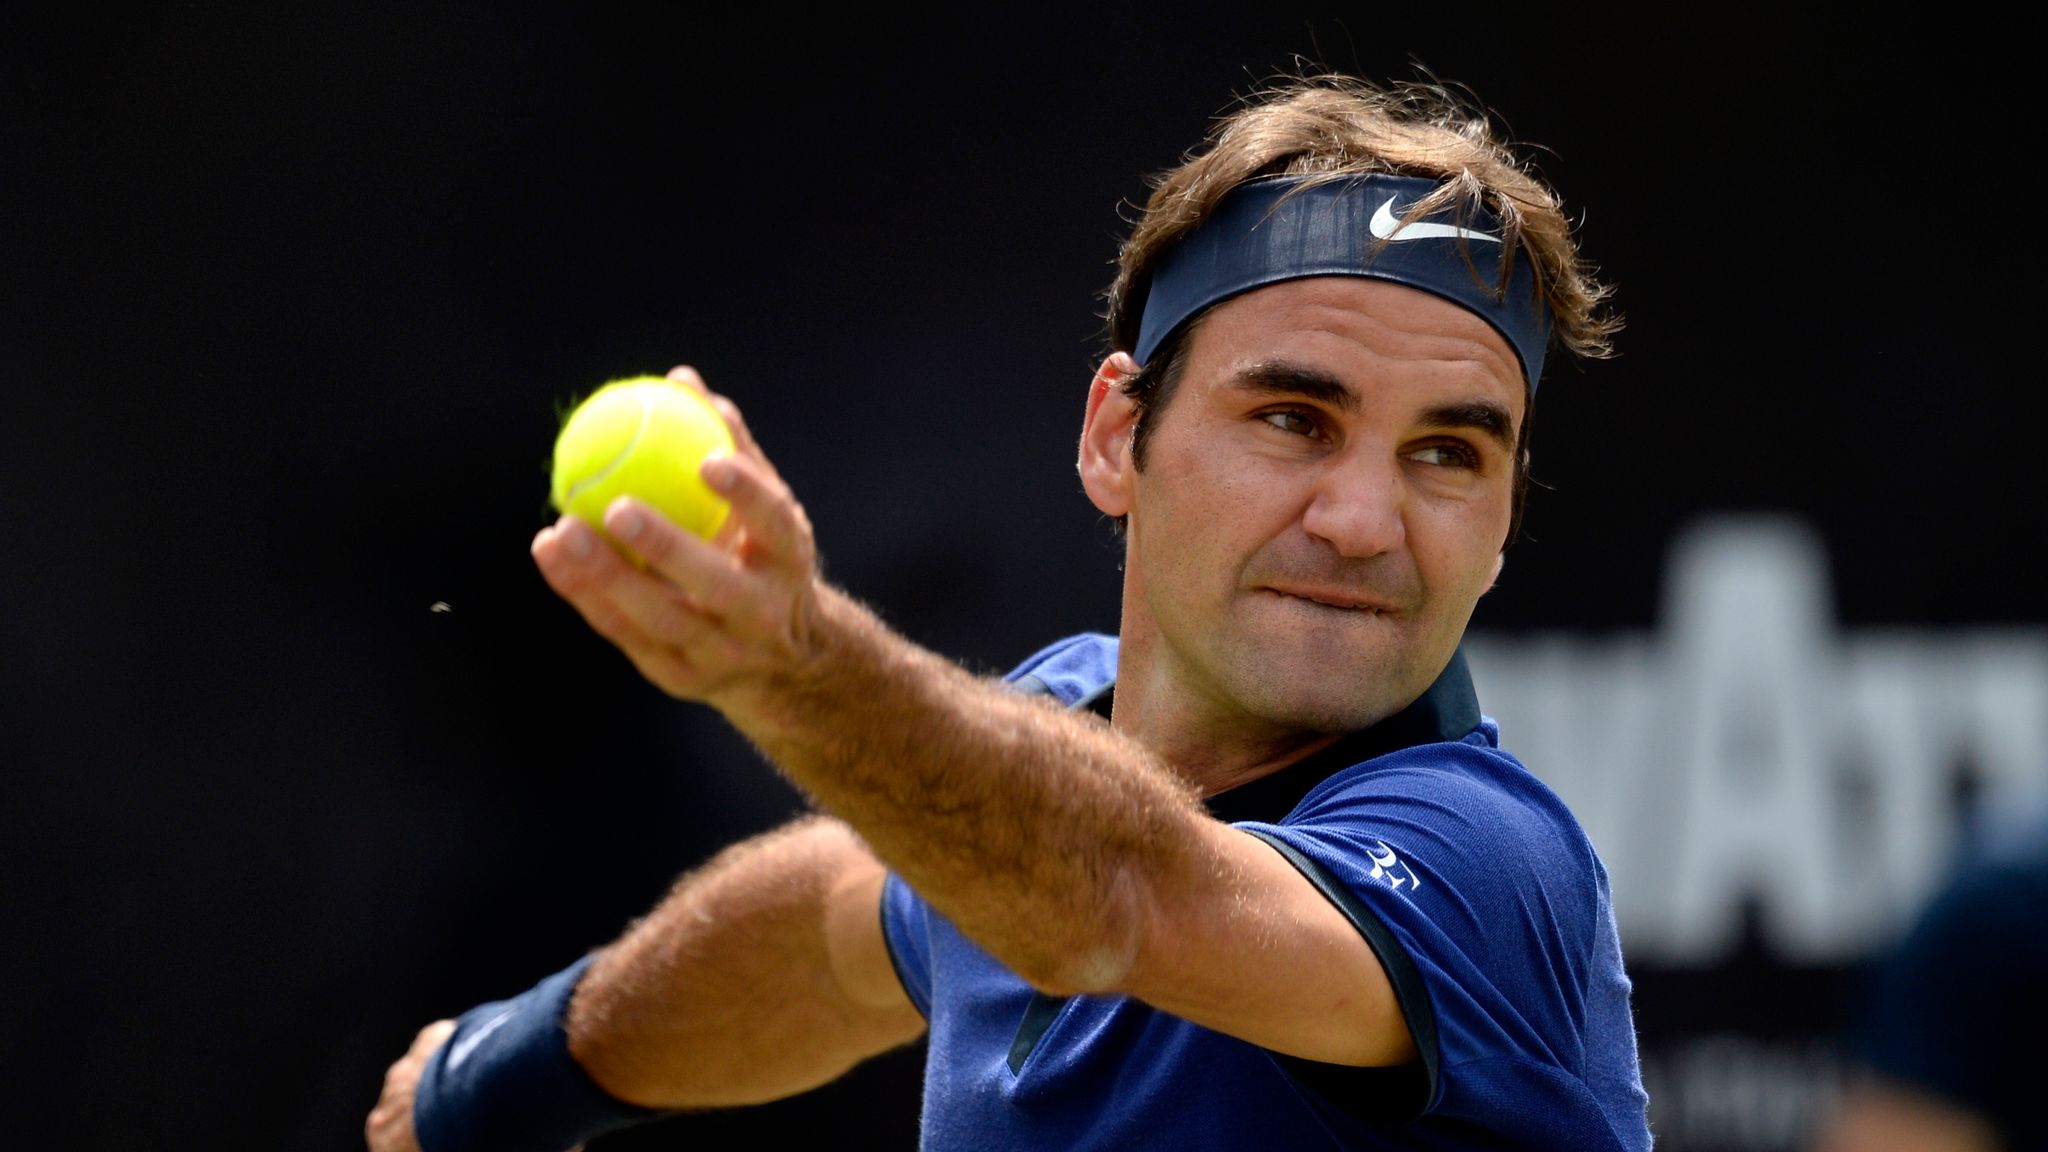 Roger Federer beats David Goffin in Halle to reach last four Tennis News Sky Sports